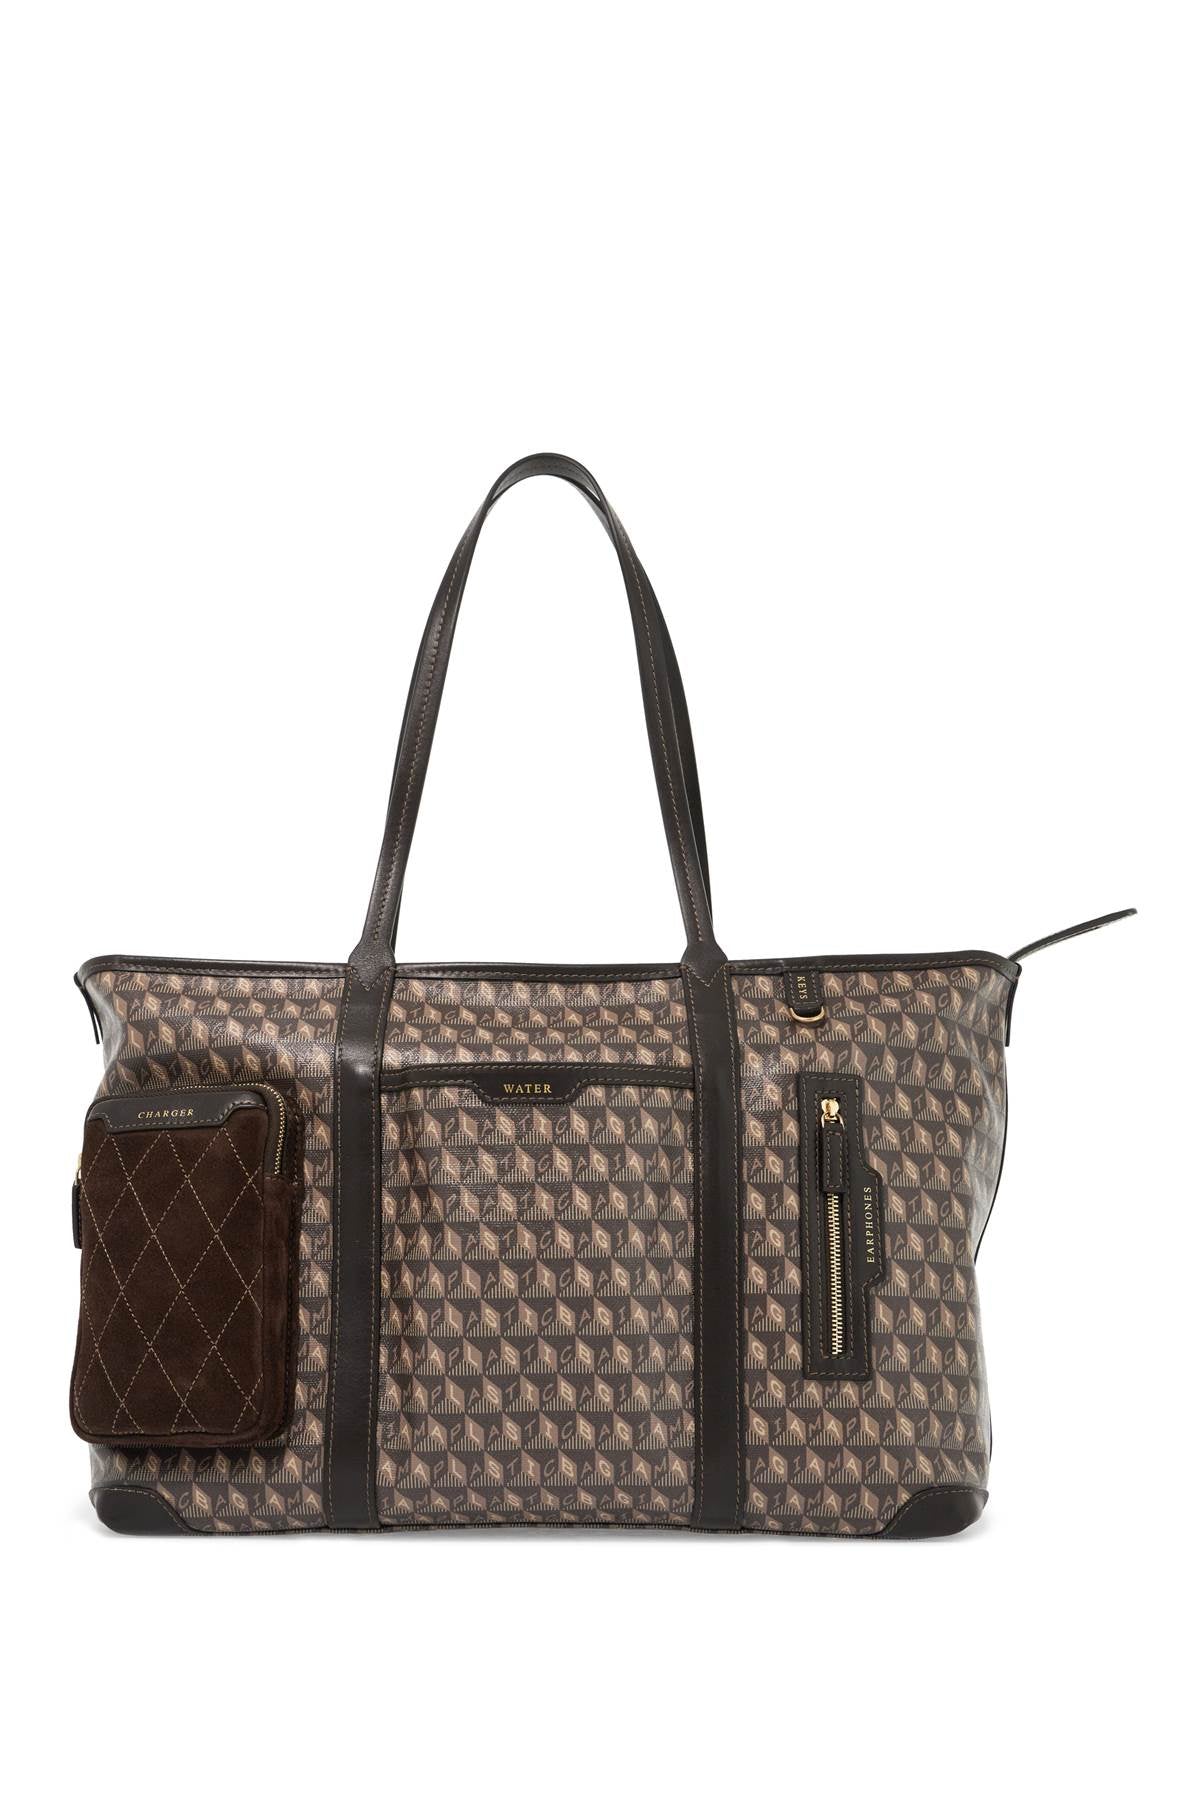 Anya Hindmarch "i Am A Plastic Bag In Flight Tote   Brown